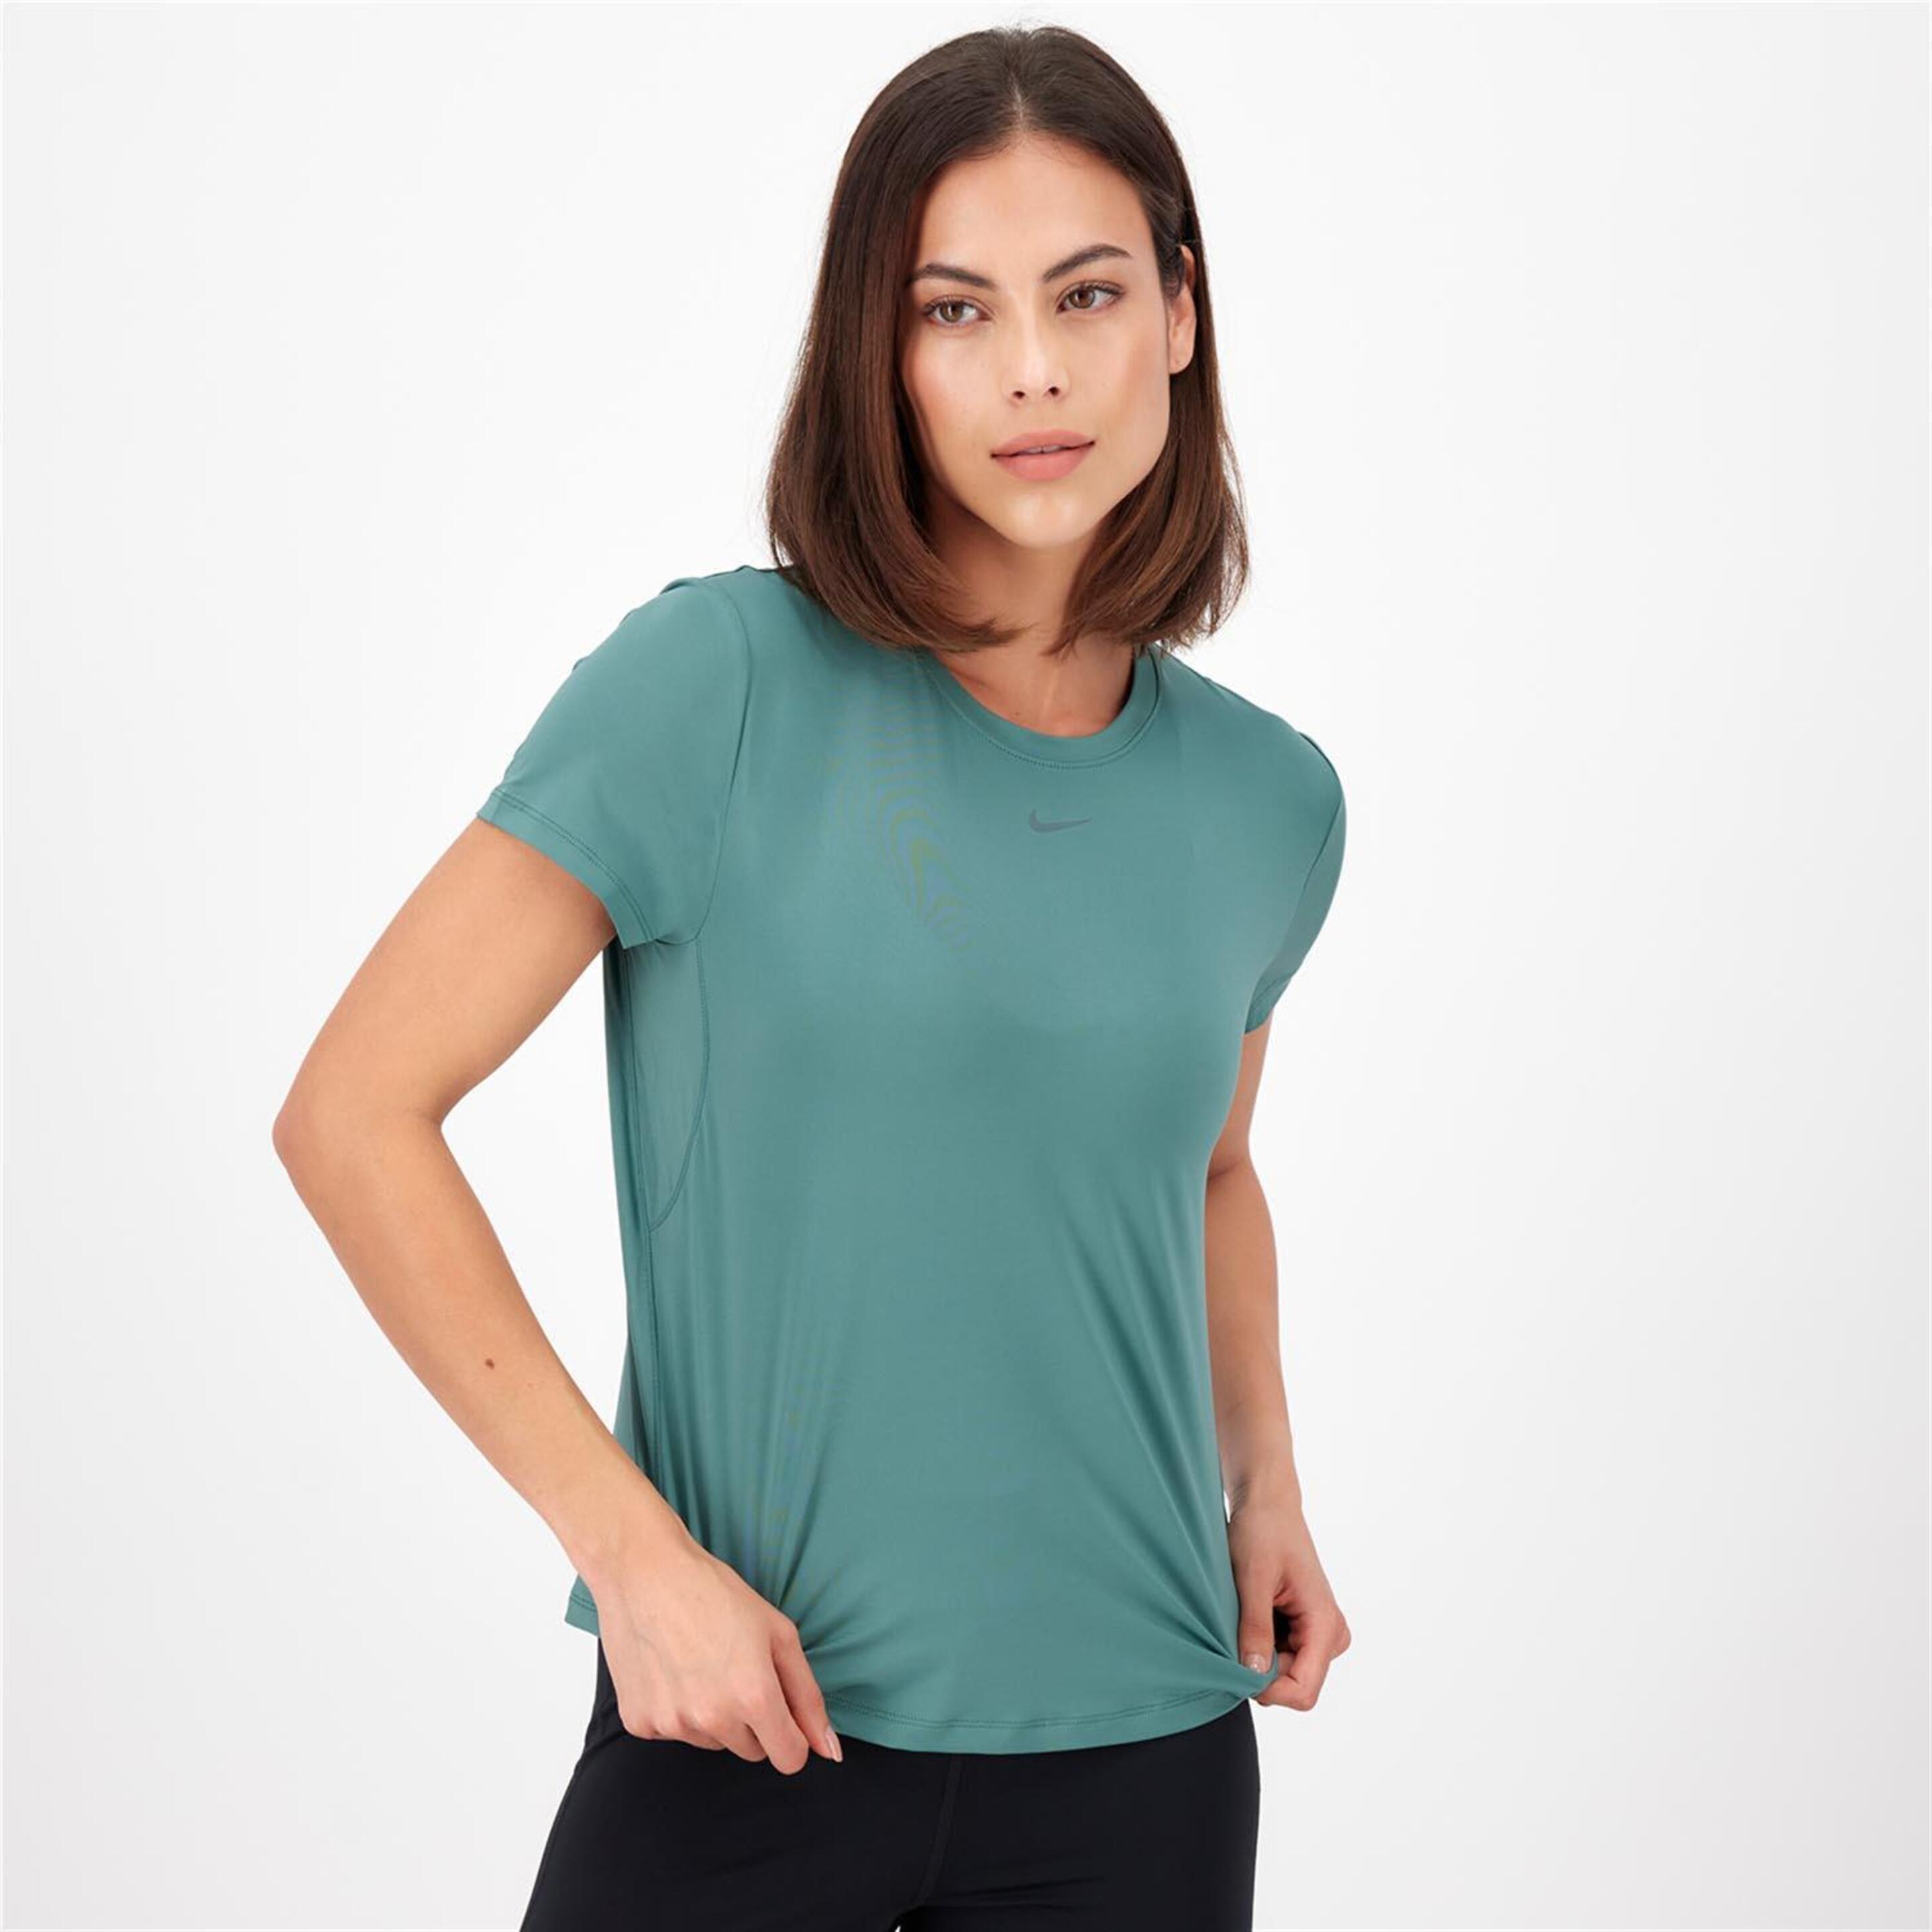 Nike One - verde - T-shirt Fitness Mulher